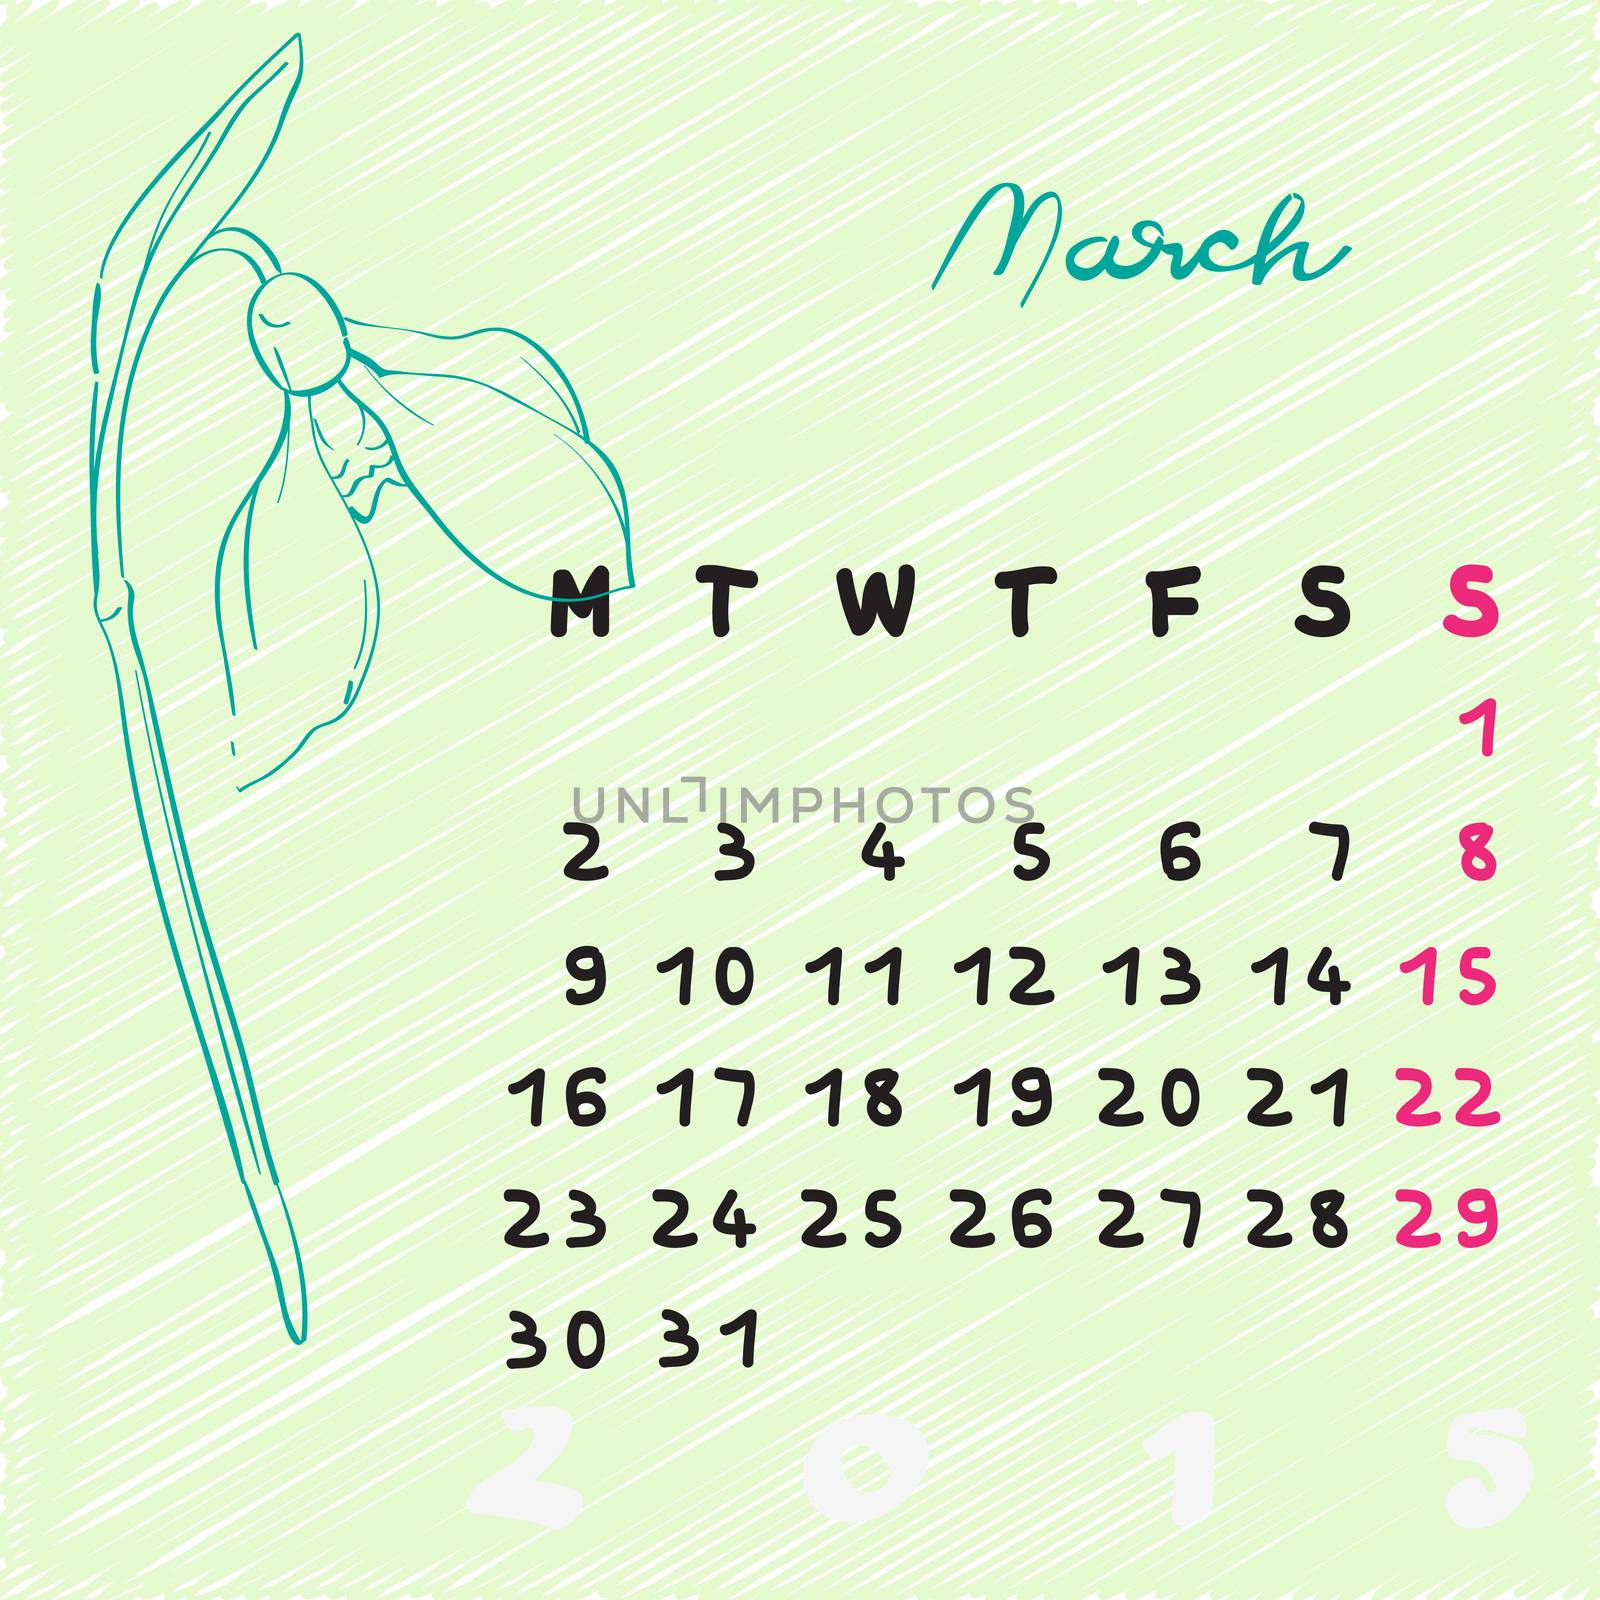 Calendar 2015, graphic illustration of March month calendar with original hand drawn text and snowdrop sketch